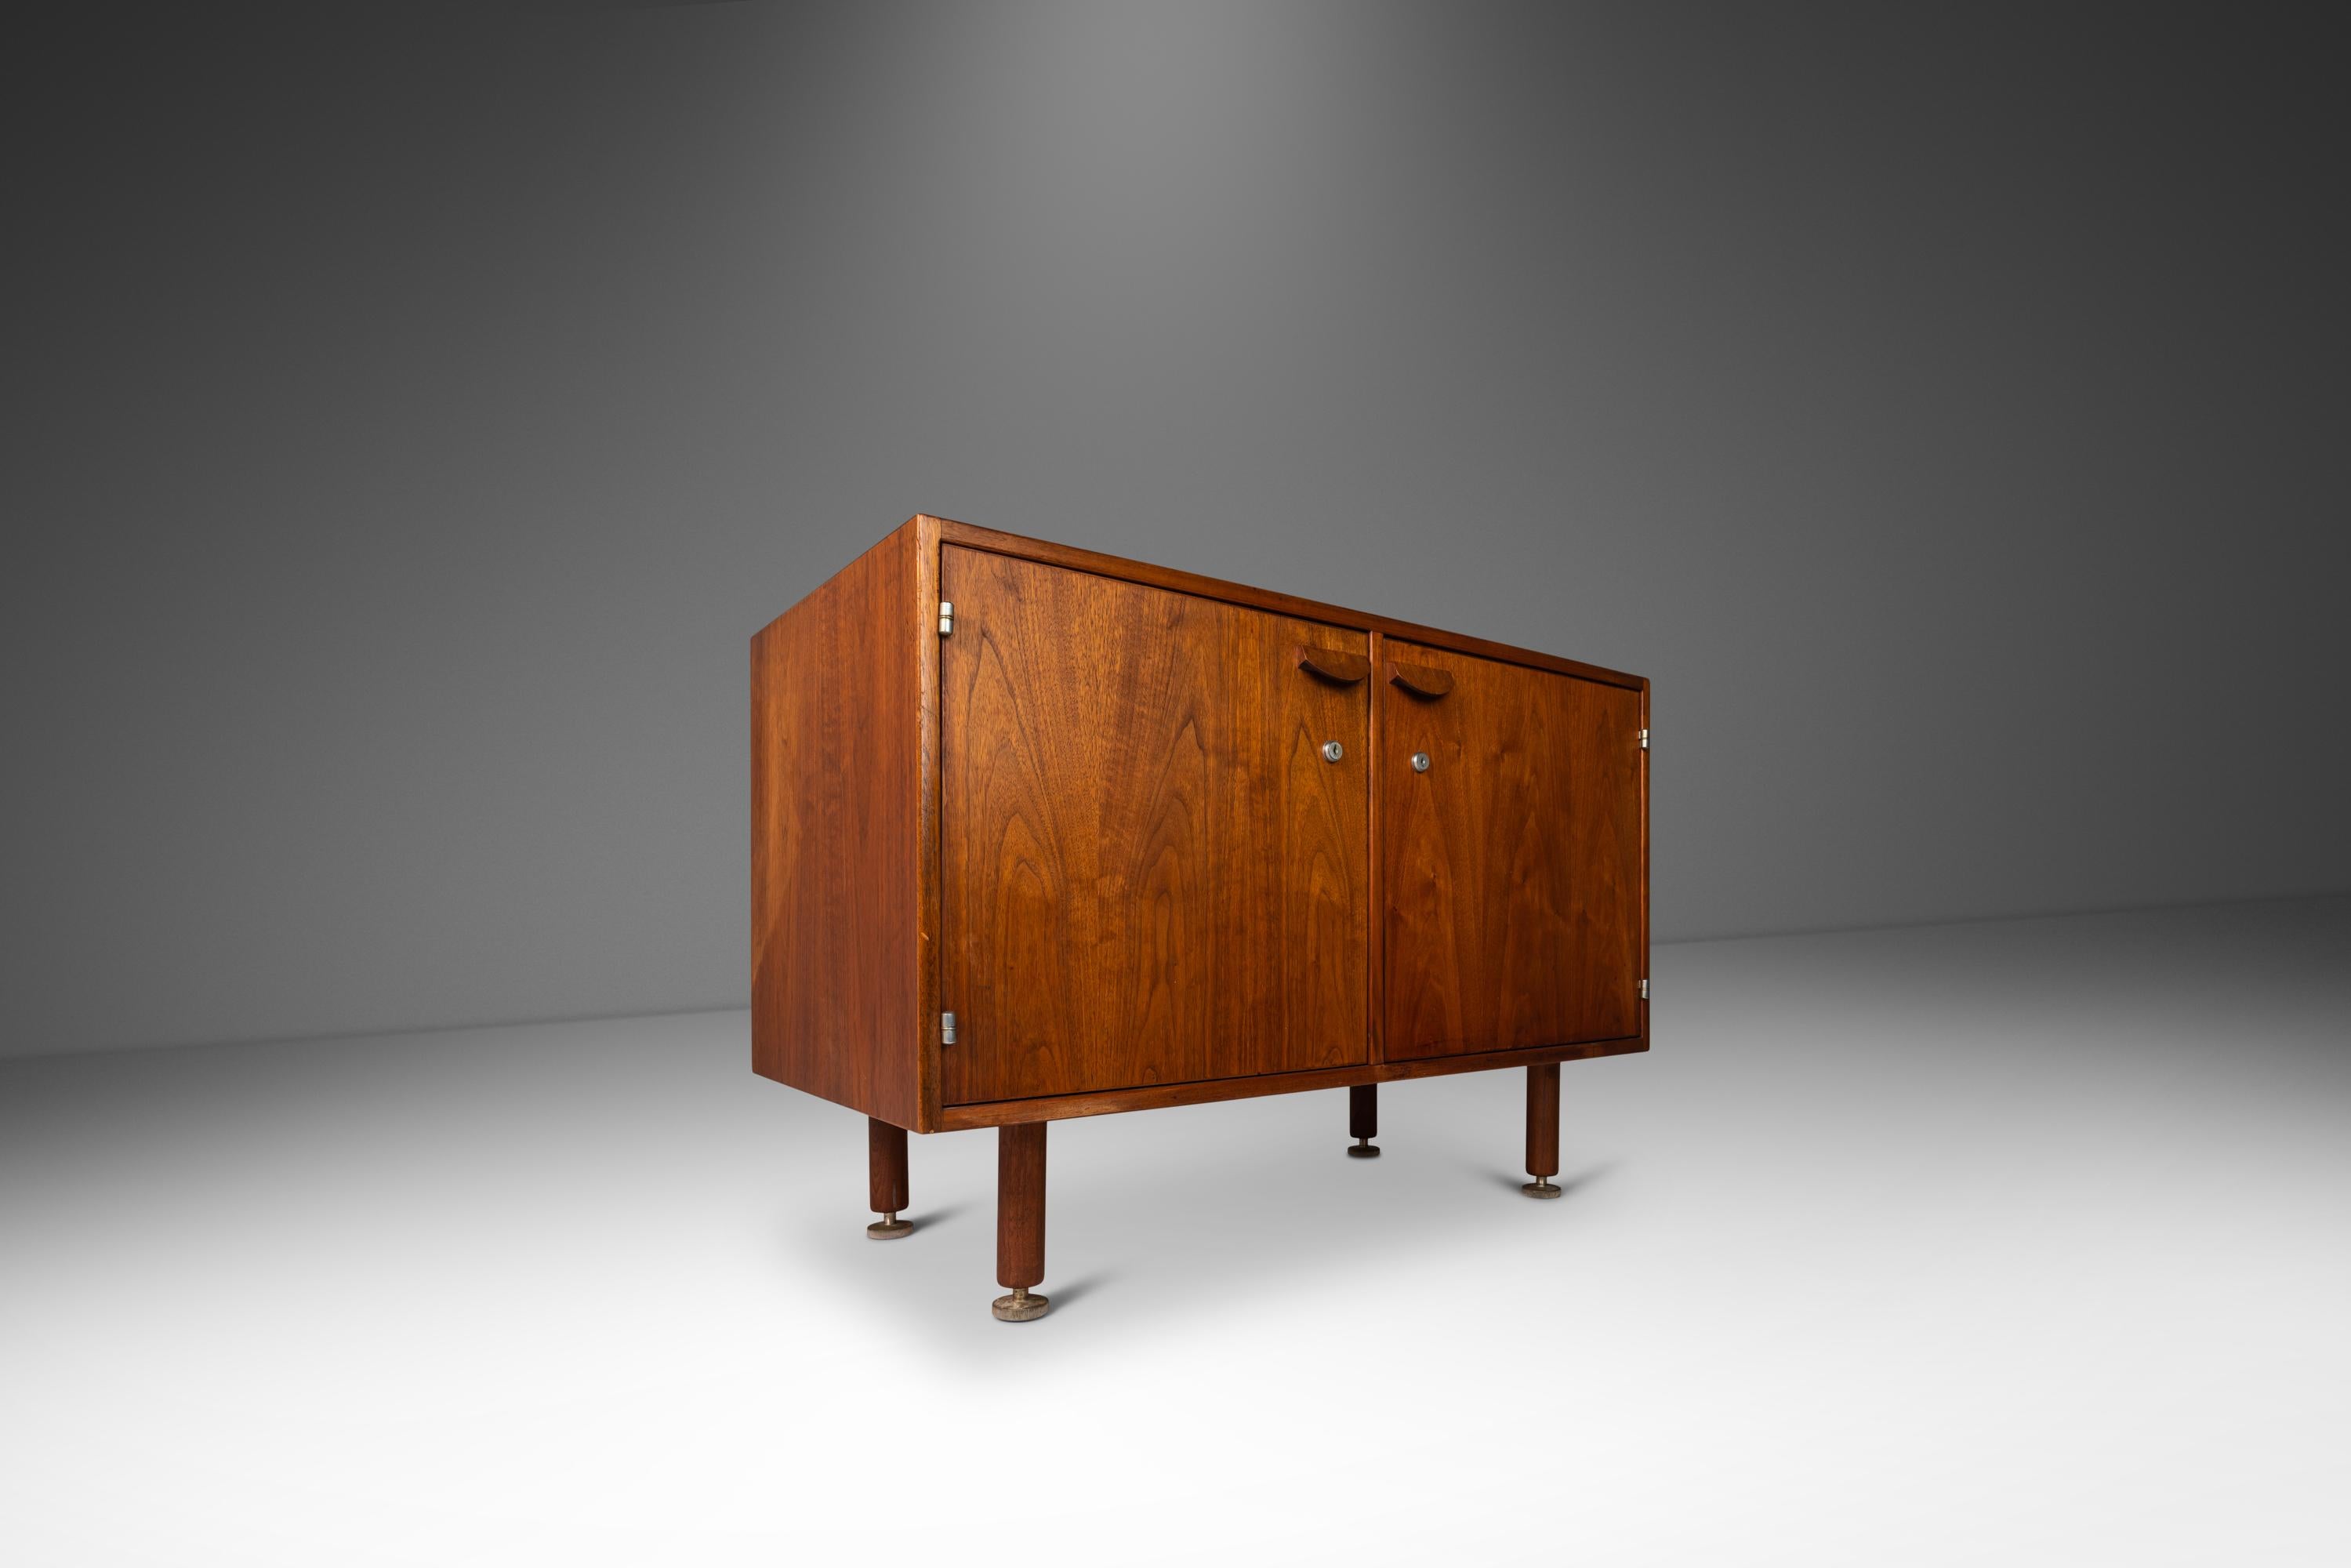 Introducing a rare two-door cabinet designed by Jens Risom produced in the Unite States in the early 1960's. Constructed from a mix of solid and veneered American Black Walnut this cabinet, which was recently featured prominently in the third season